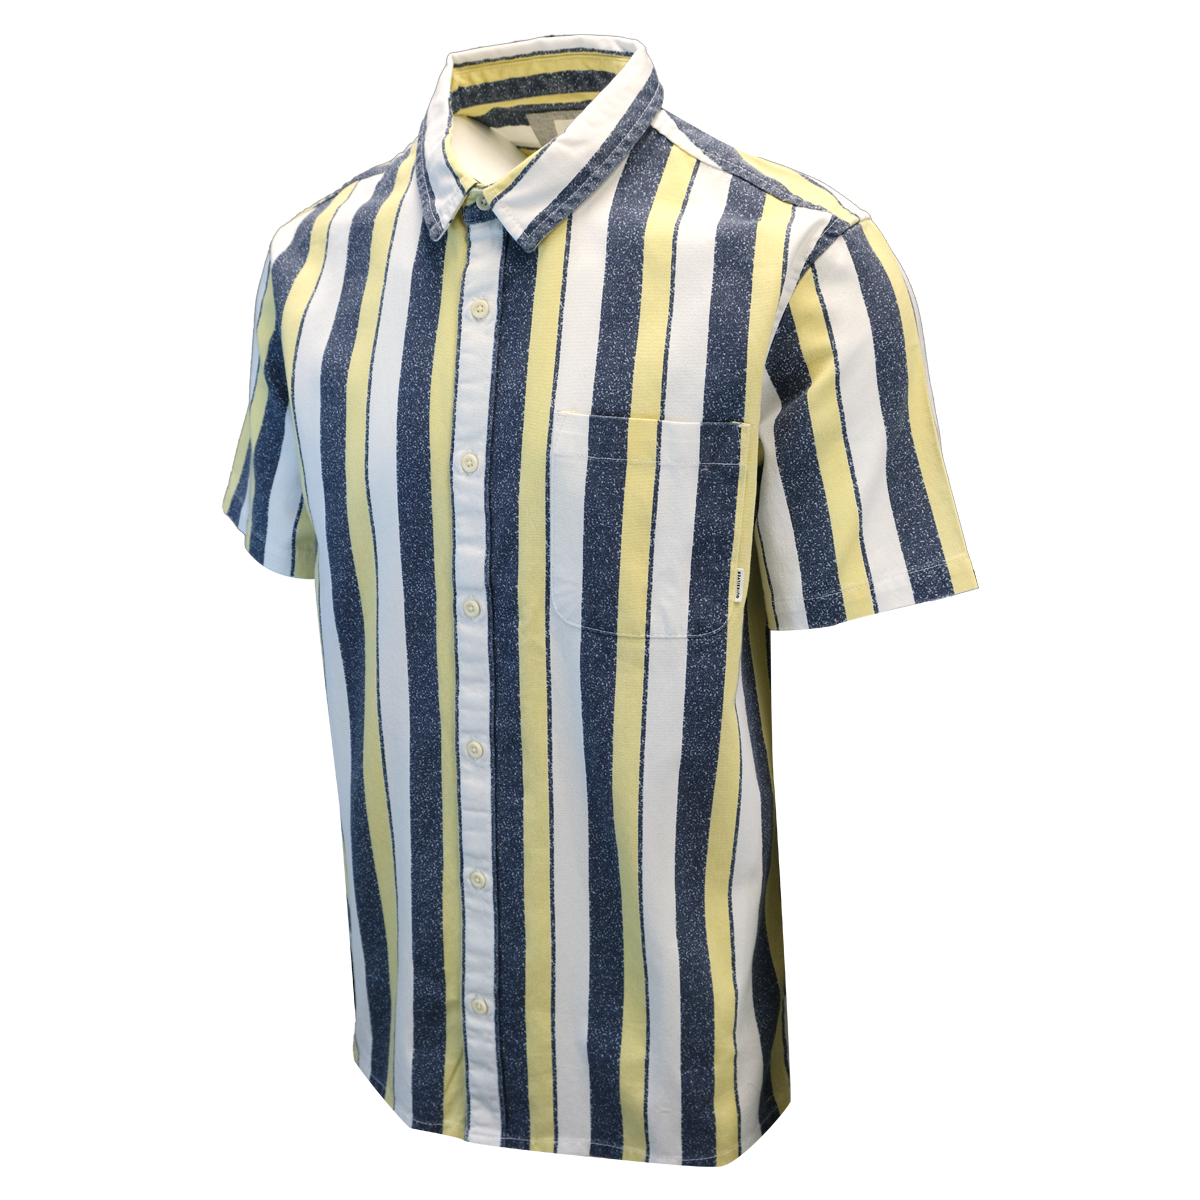 Quik Silver Men's 50 Years Of Adventure Striped S/S Woven Shirt